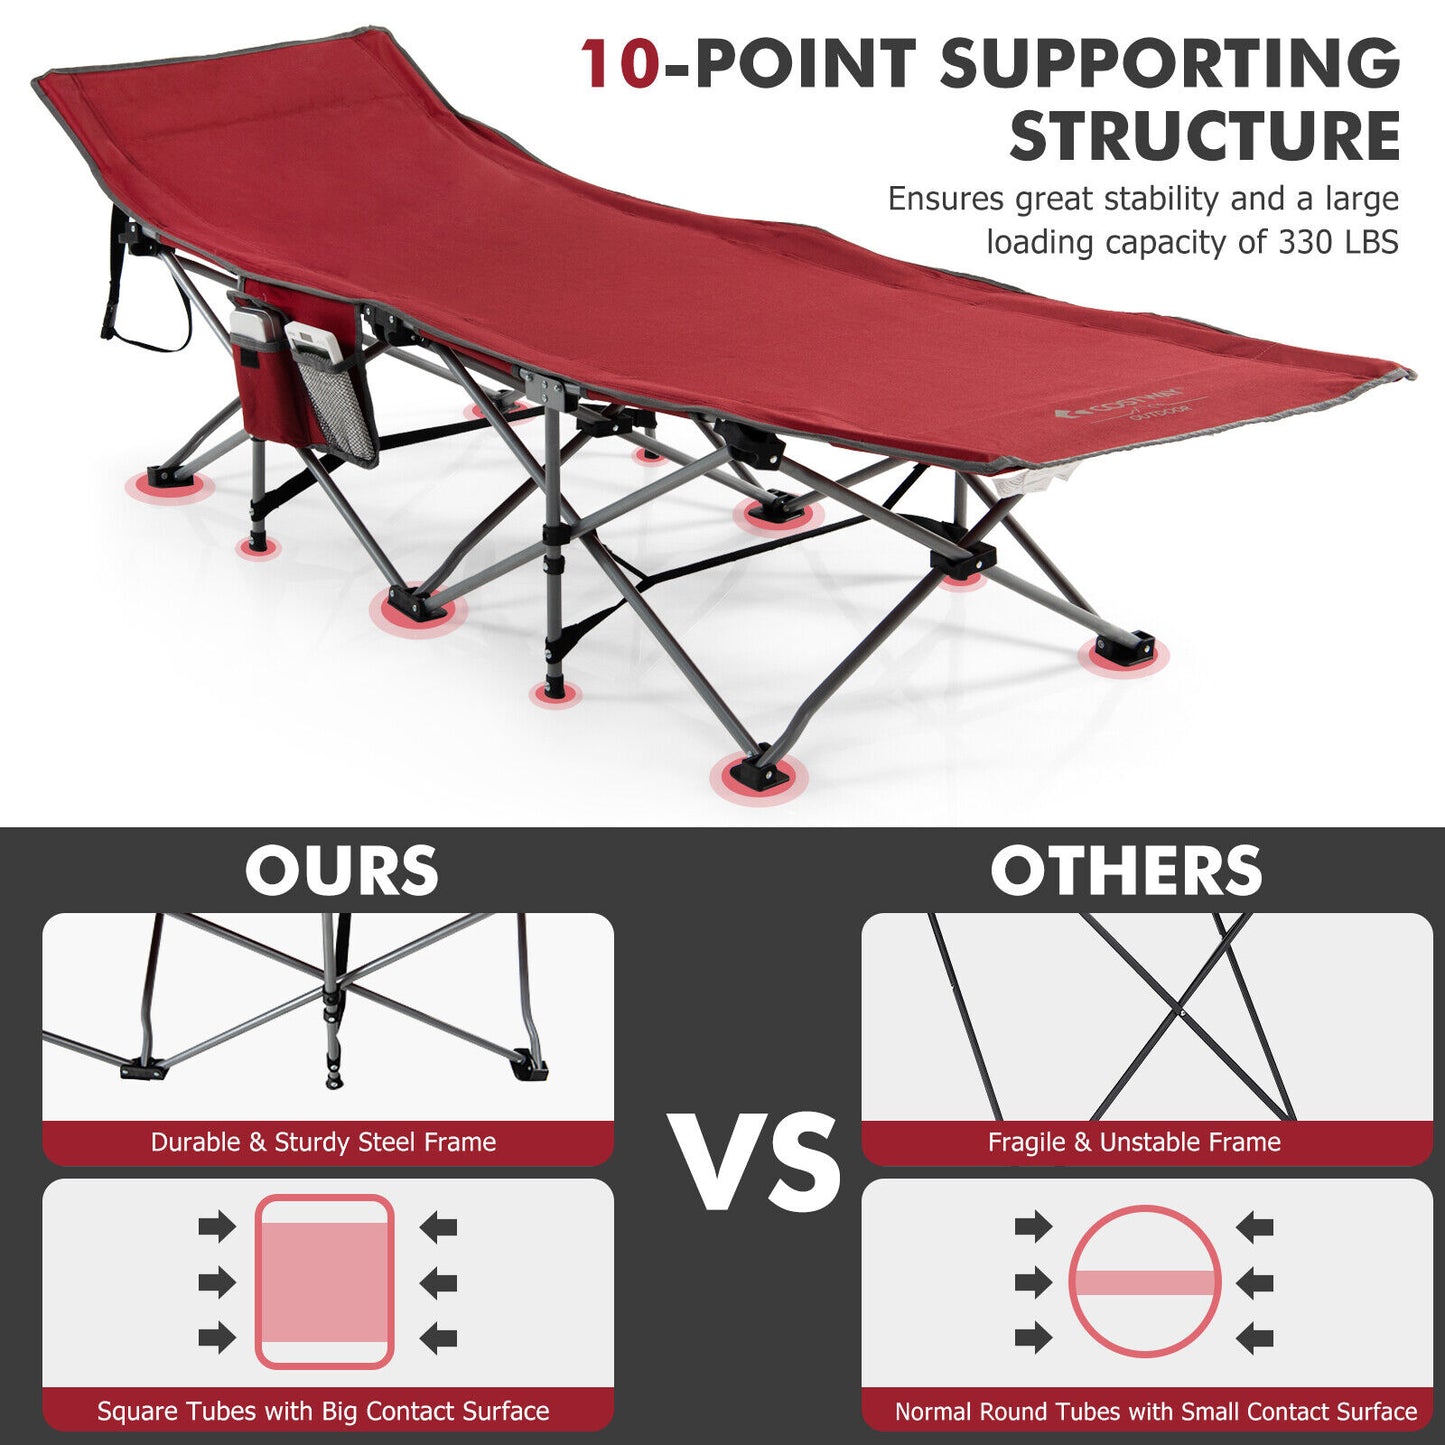 Folding Retractable Travel Camping Cot with Mattress and Carry Bag-Red